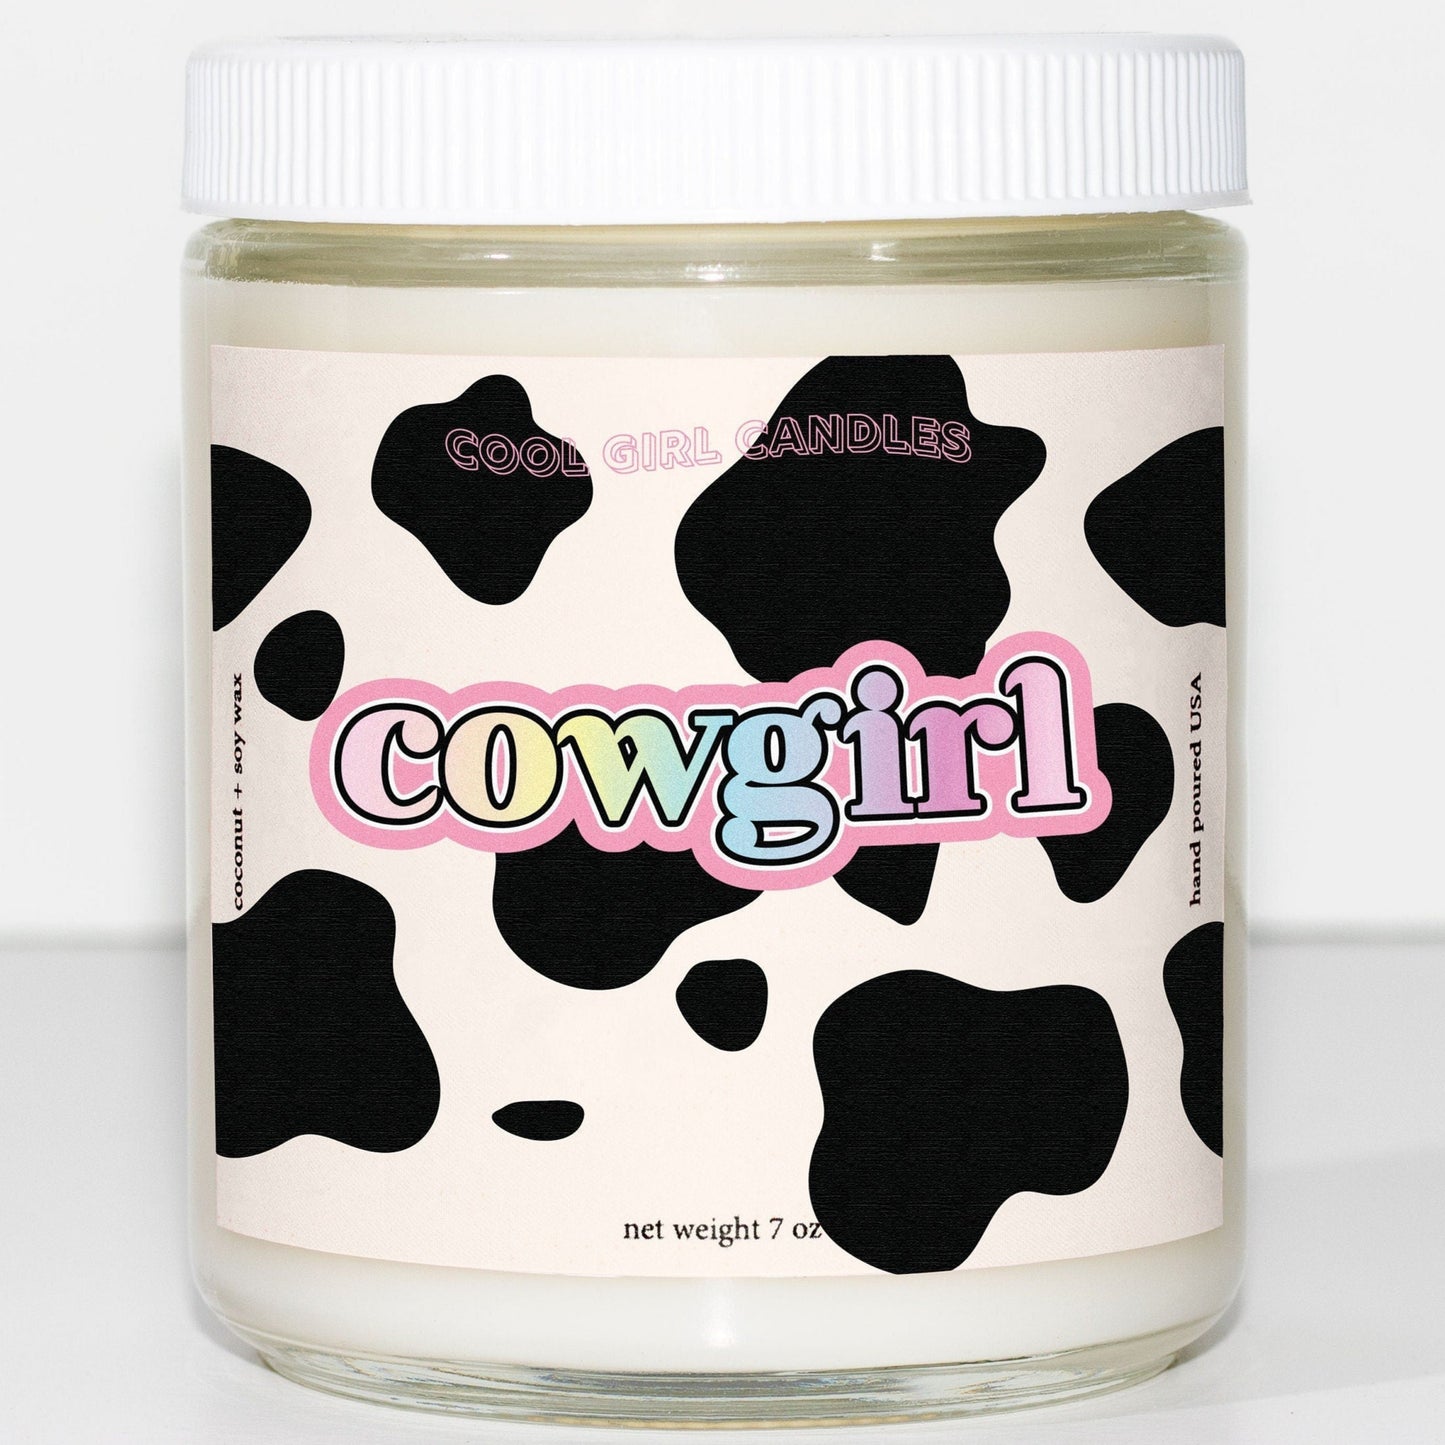 cool girl candles cowgirl scented candle cosmic space cowgirl aesthetic room decor western aesthetic candle with cow print